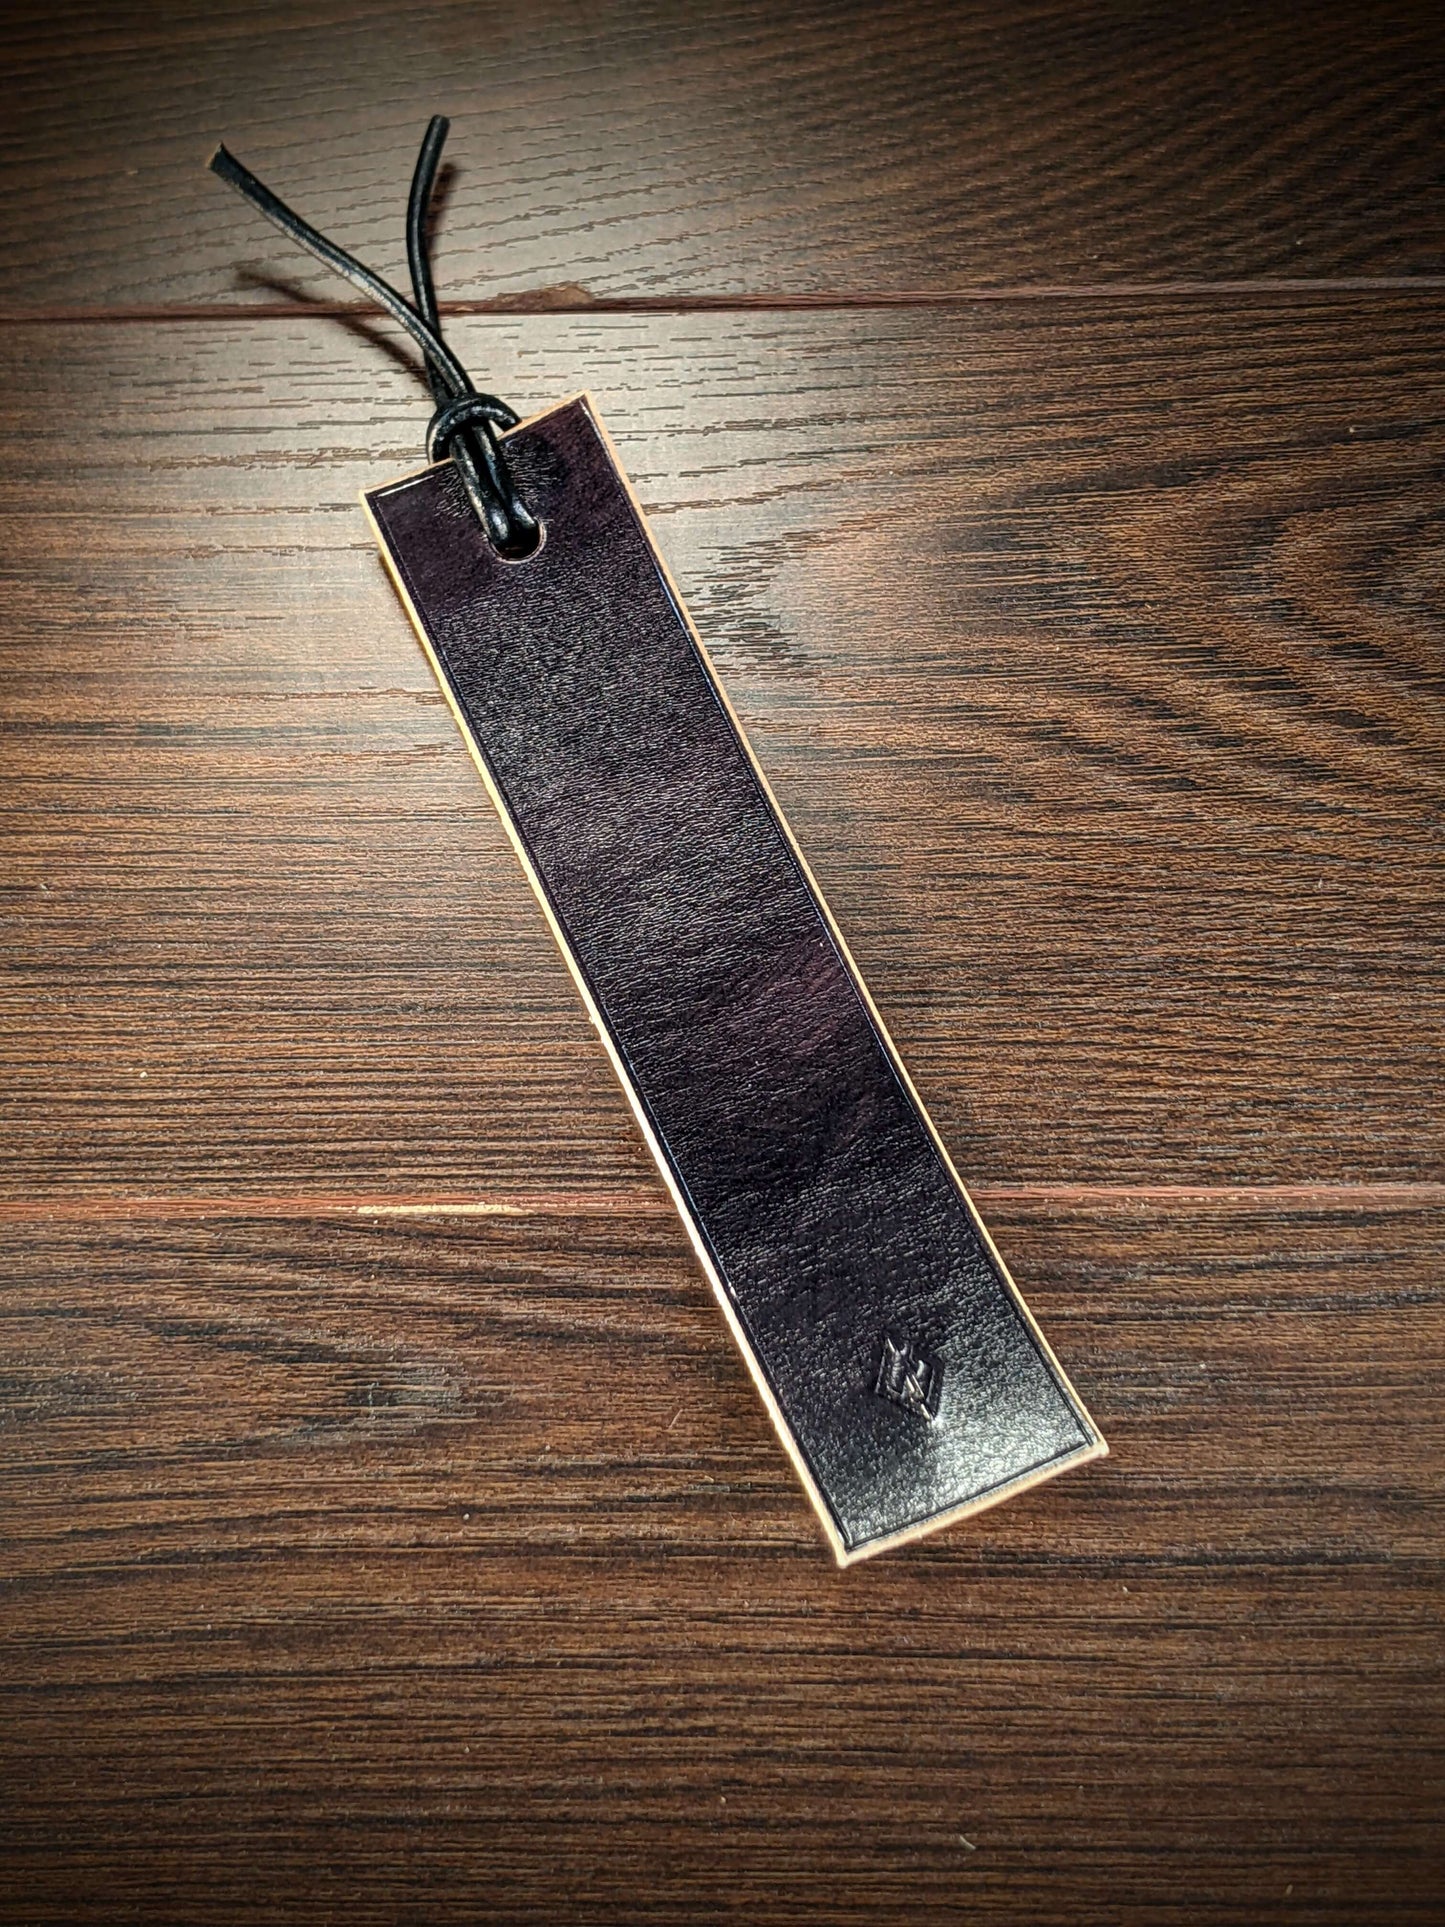 The VG Bookmark